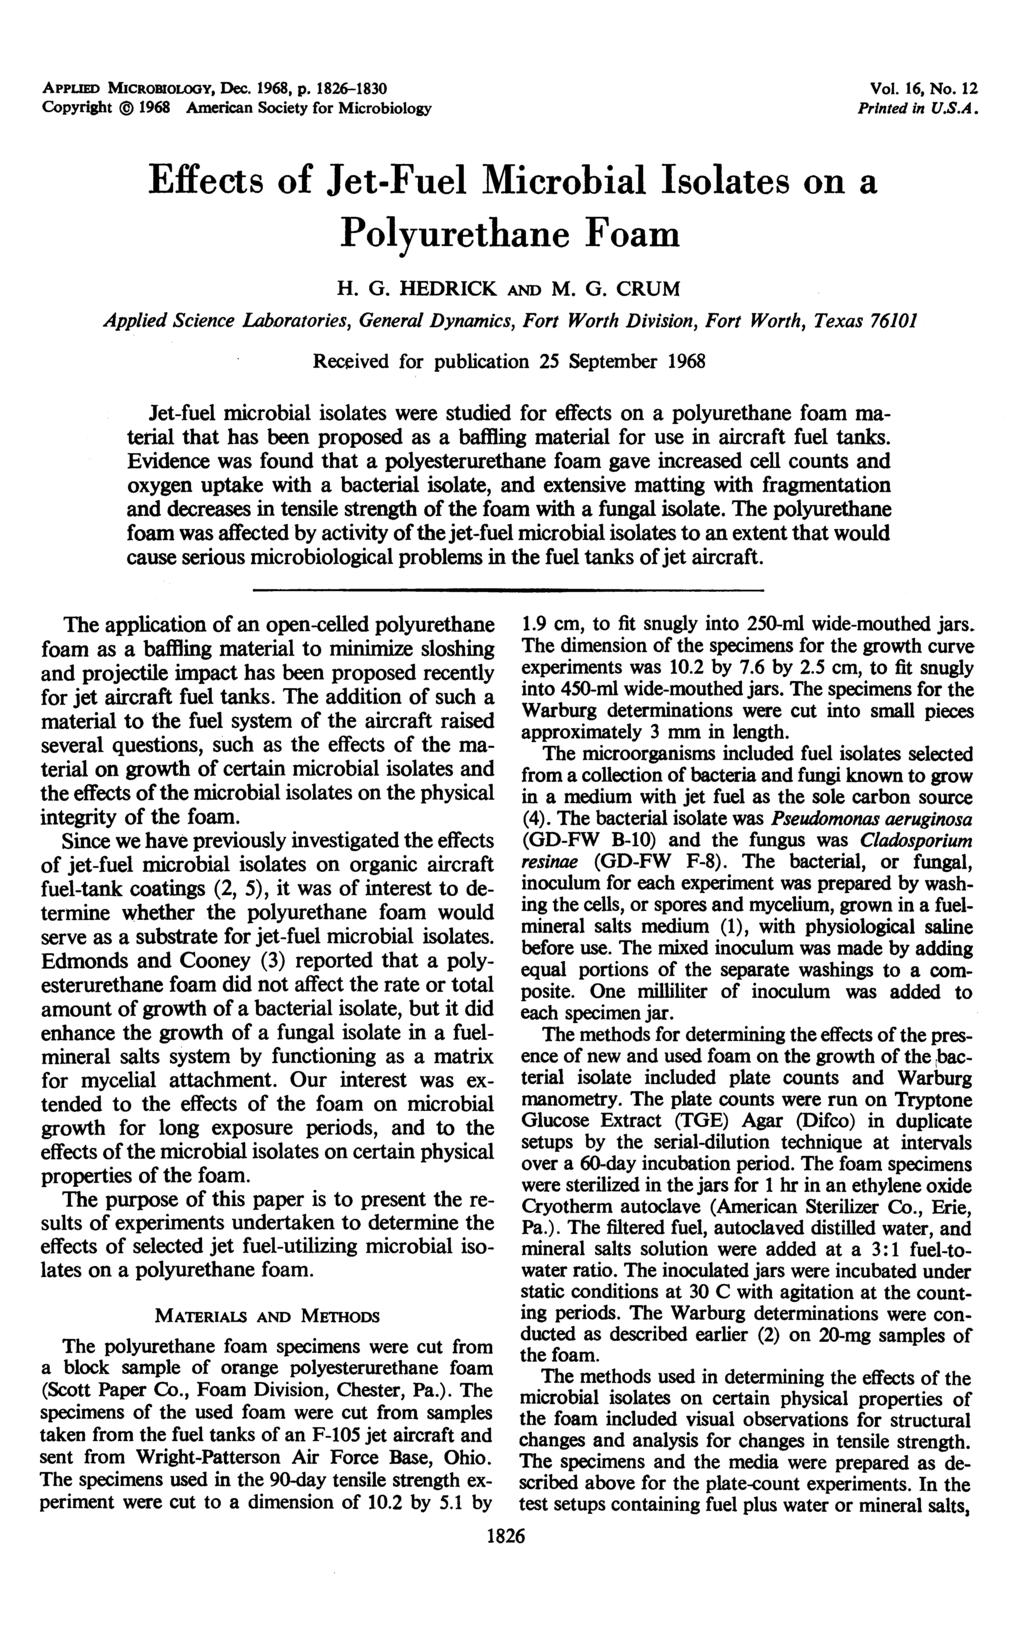 APPLIE MIcRomoLwy, Dec. 168, p. 1826-1830 Vol. 16, No. 12 Copyright 168 American Society for Microbiology Printed in U.S.A. Effects of Jet-Fuel Microbial Isolates on a Polyurethane Foam H. G.